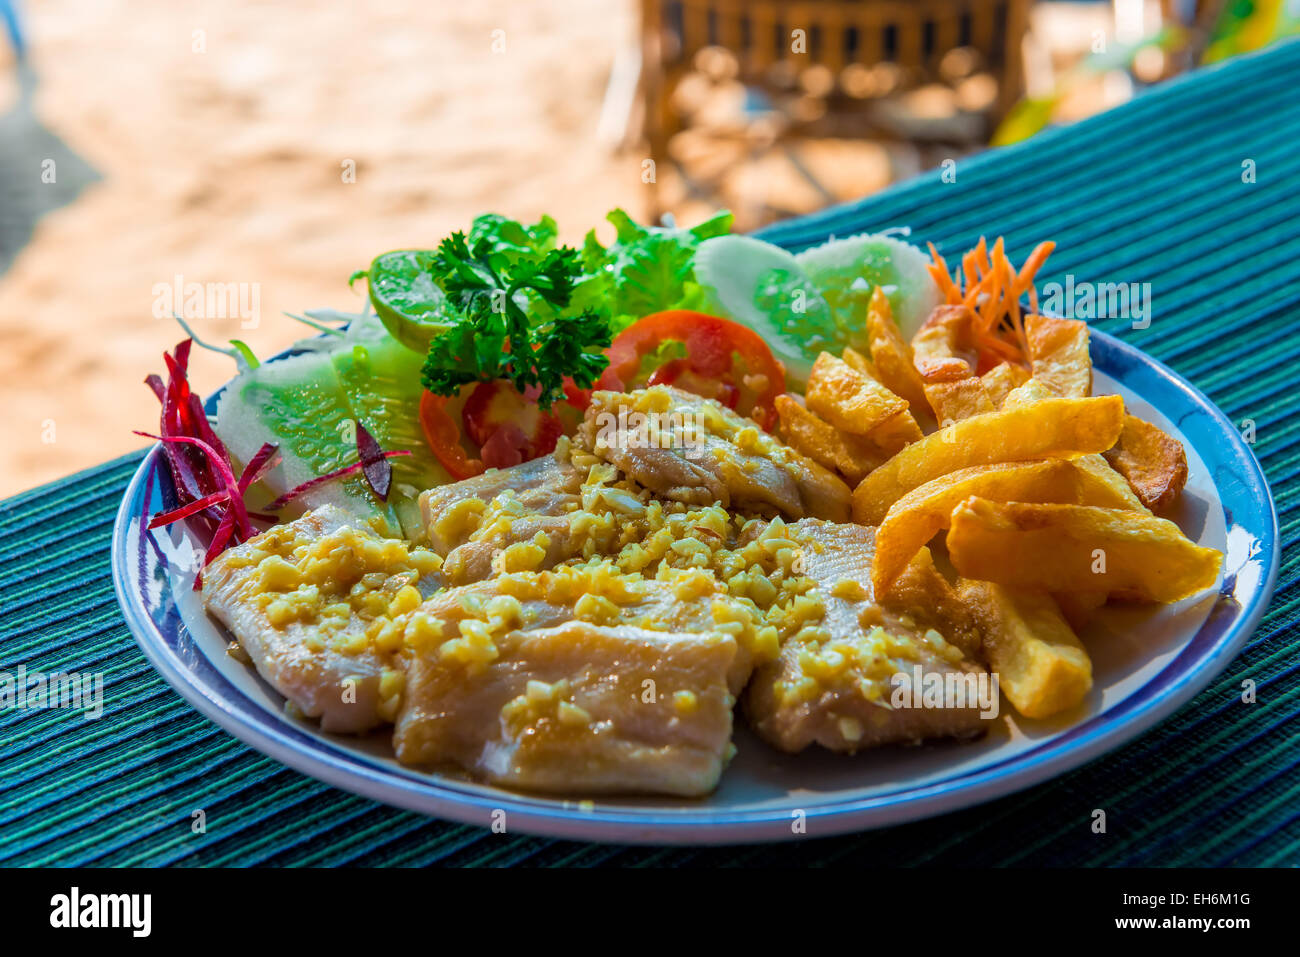 fish fillets with potatoes and salad on a plate Stock Photo